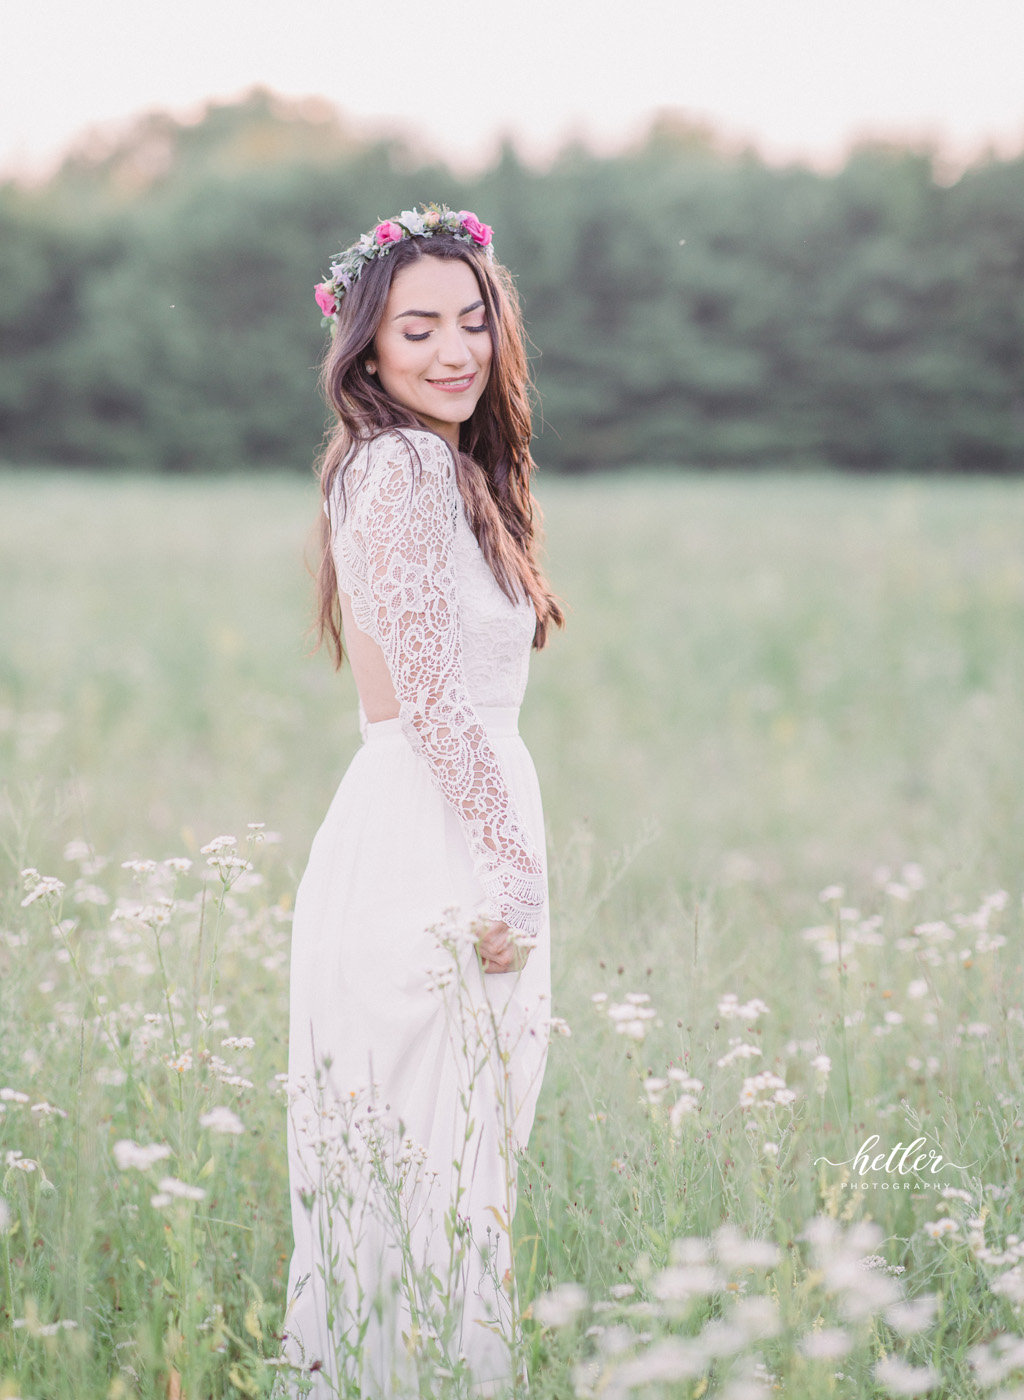 Kalamazoo wedding photography in a lavender field